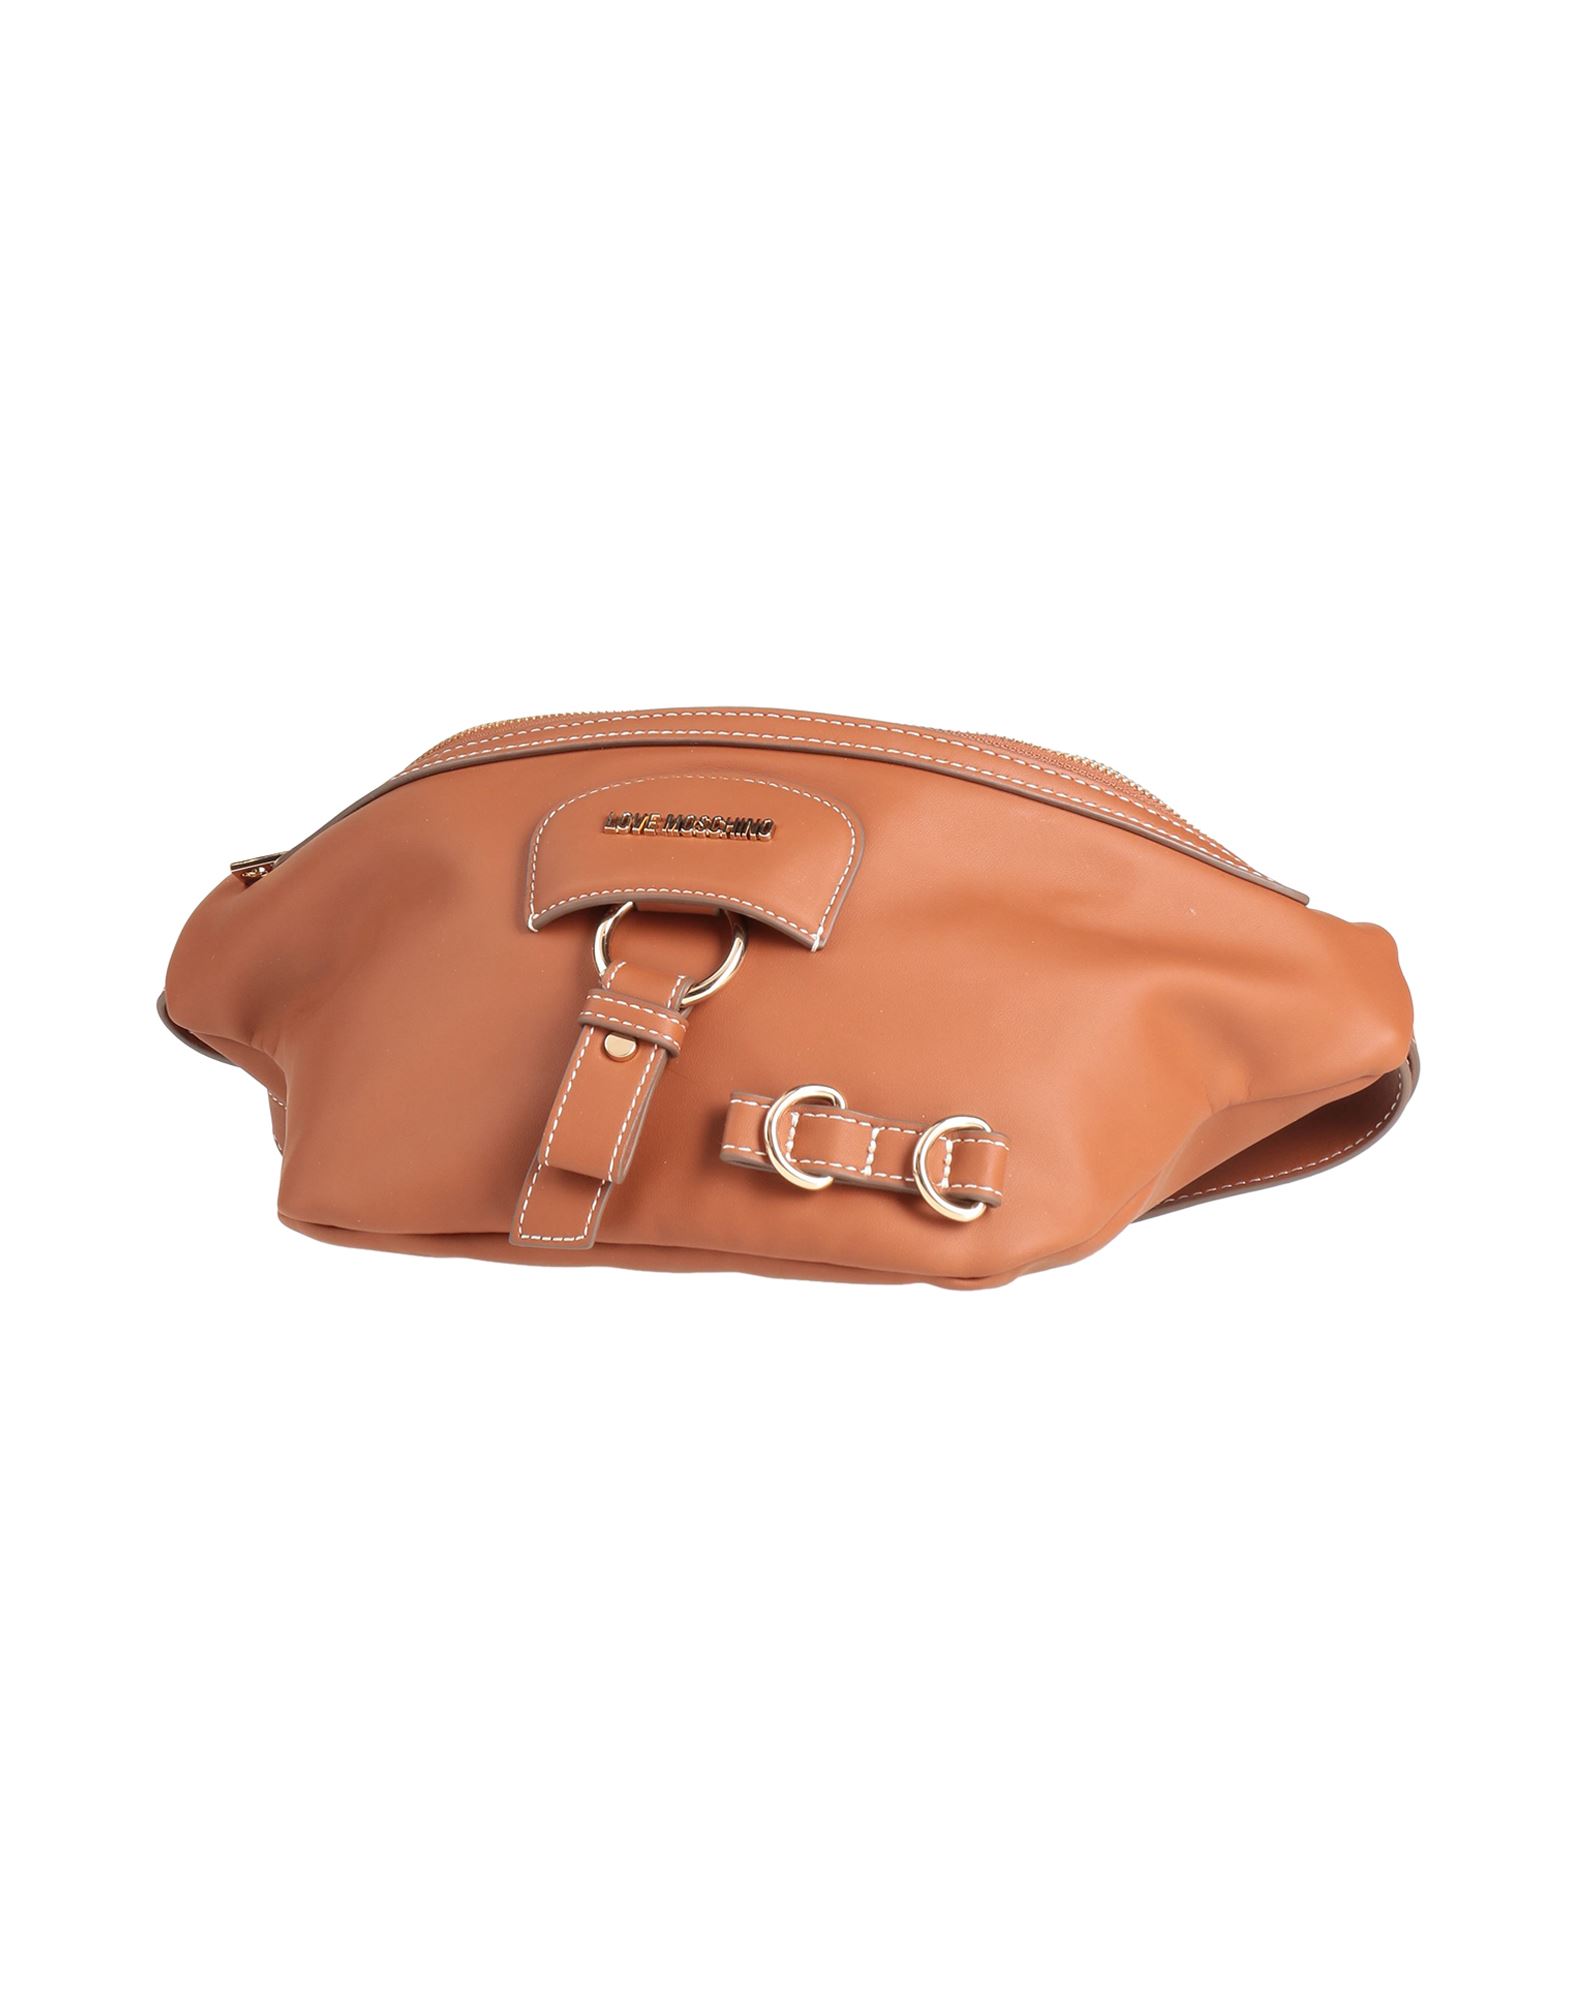 Love Moschino Bum Bags In Camel